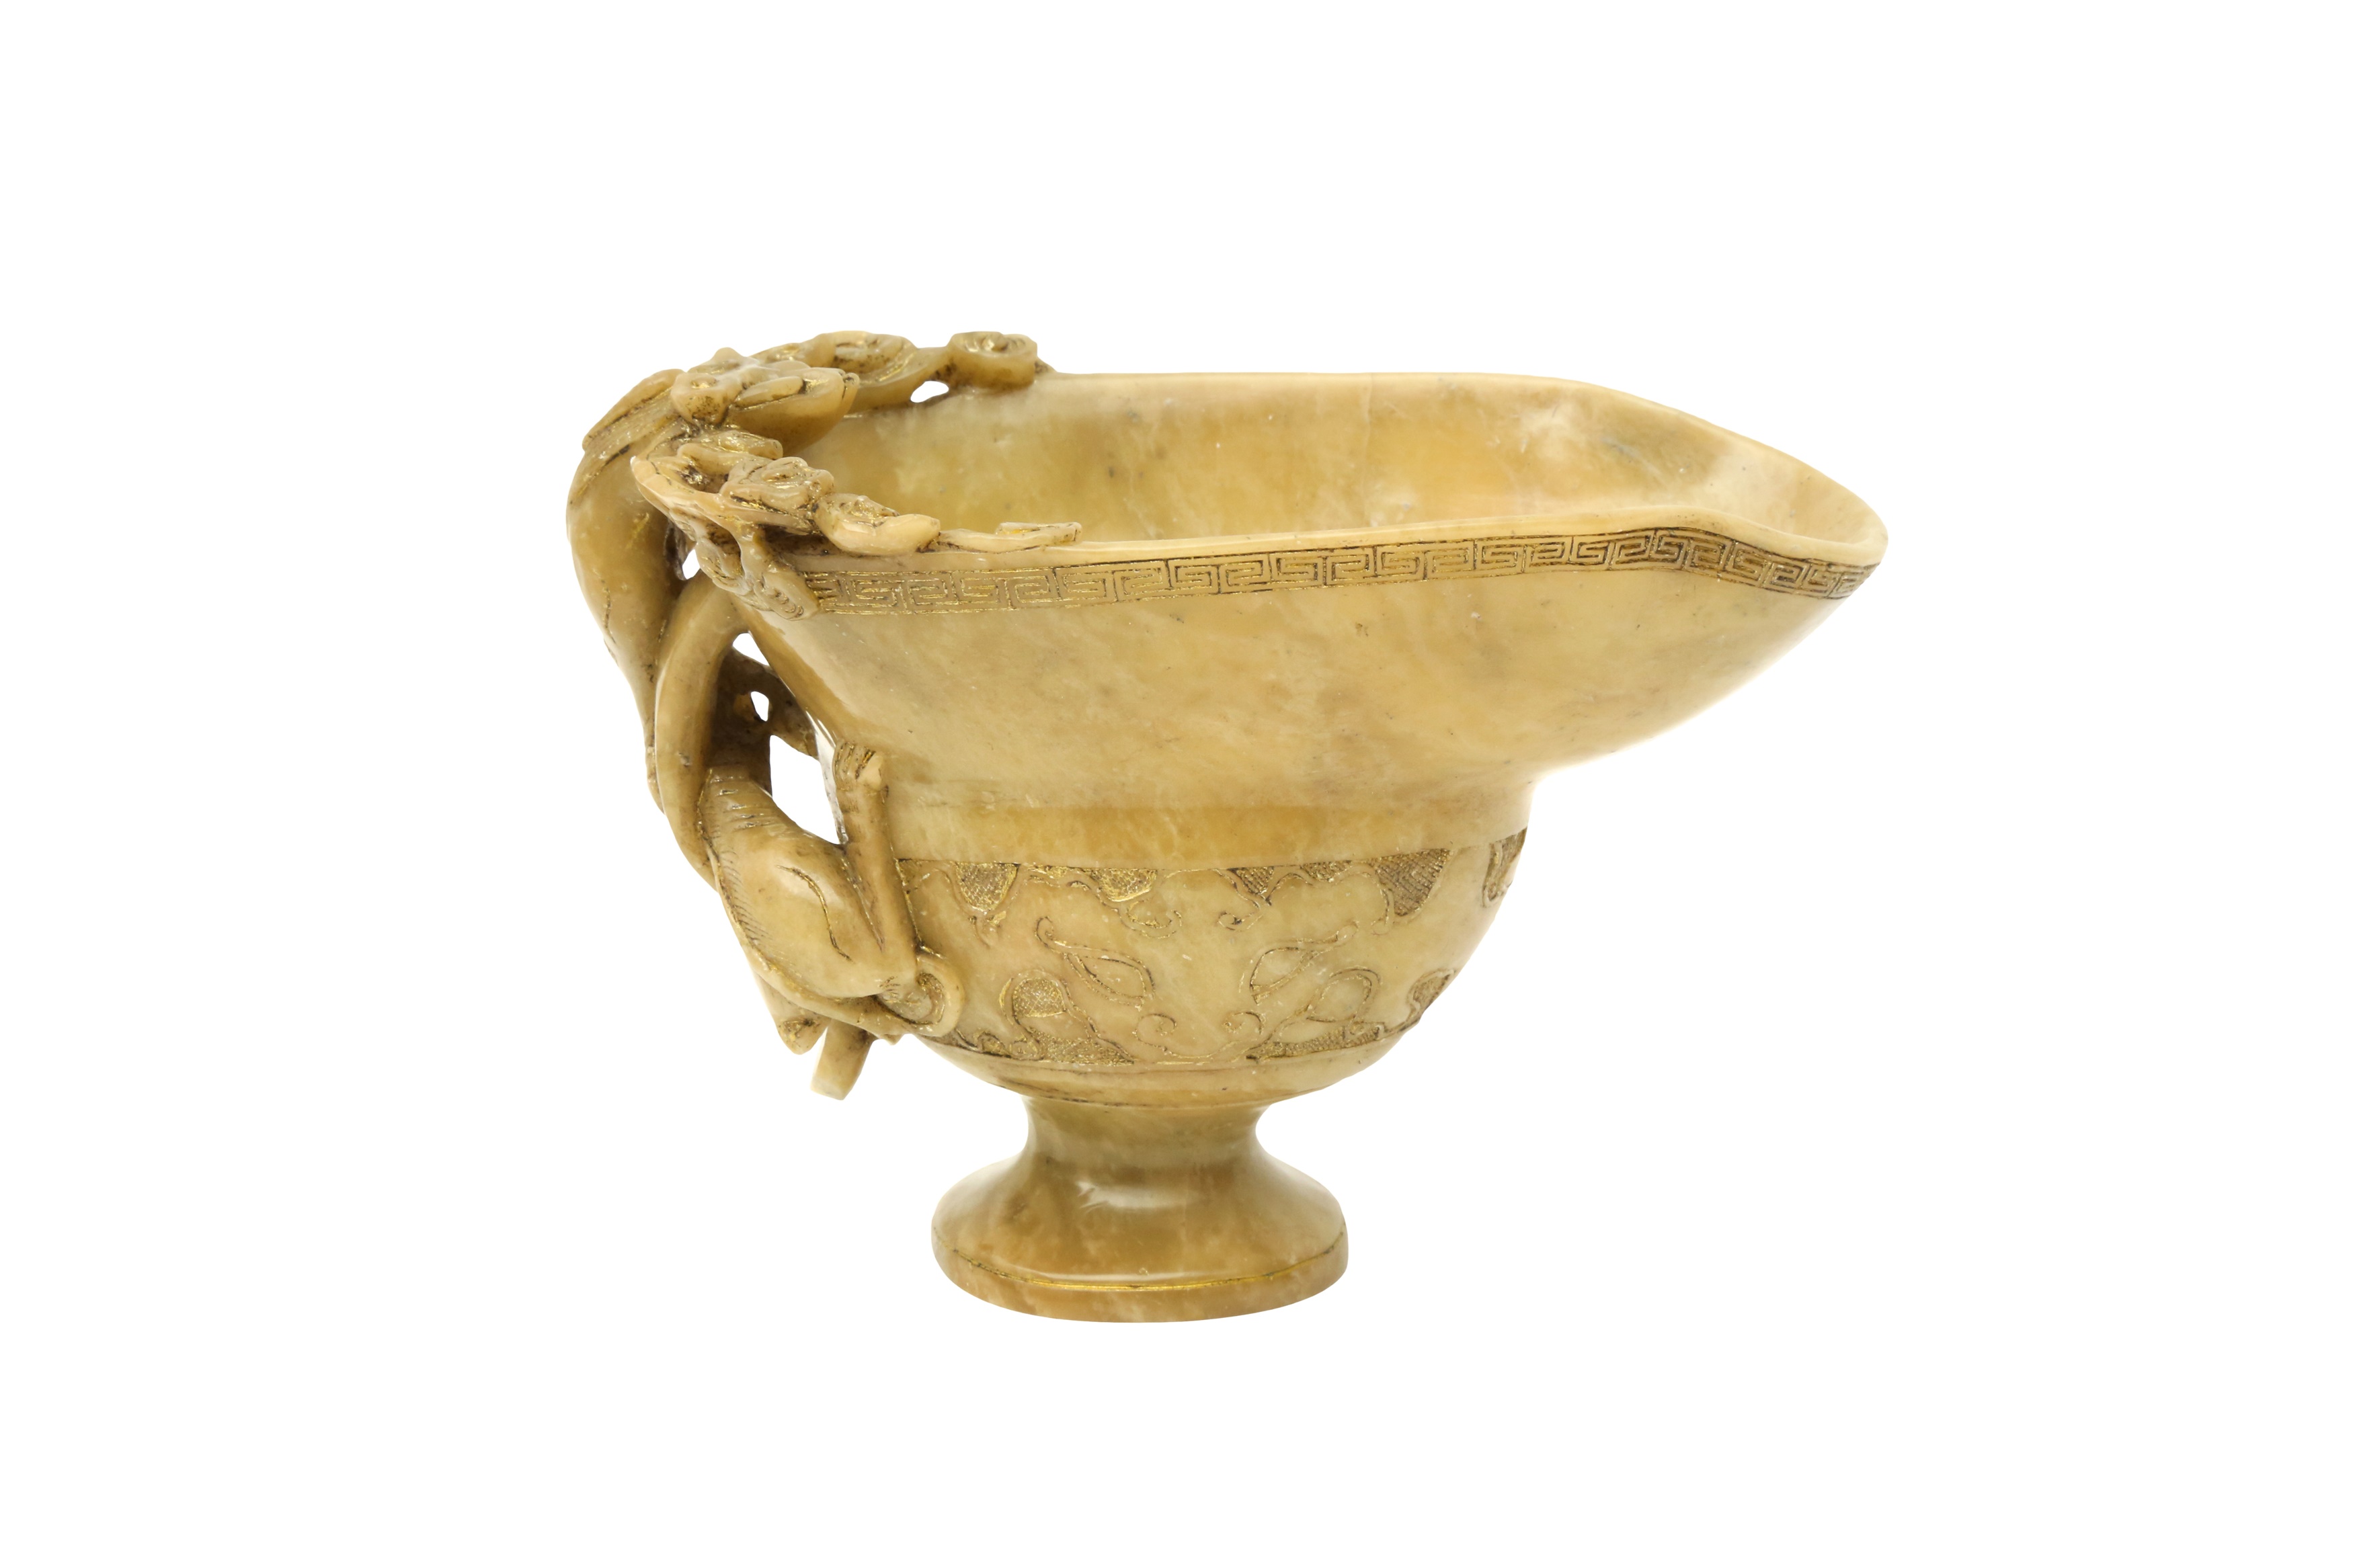 A CHINESE SOAPSTONE 'CHILONG' LIBATION CUP 十七或十八世紀 壽山石螭龍紋盃 - Image 2 of 2